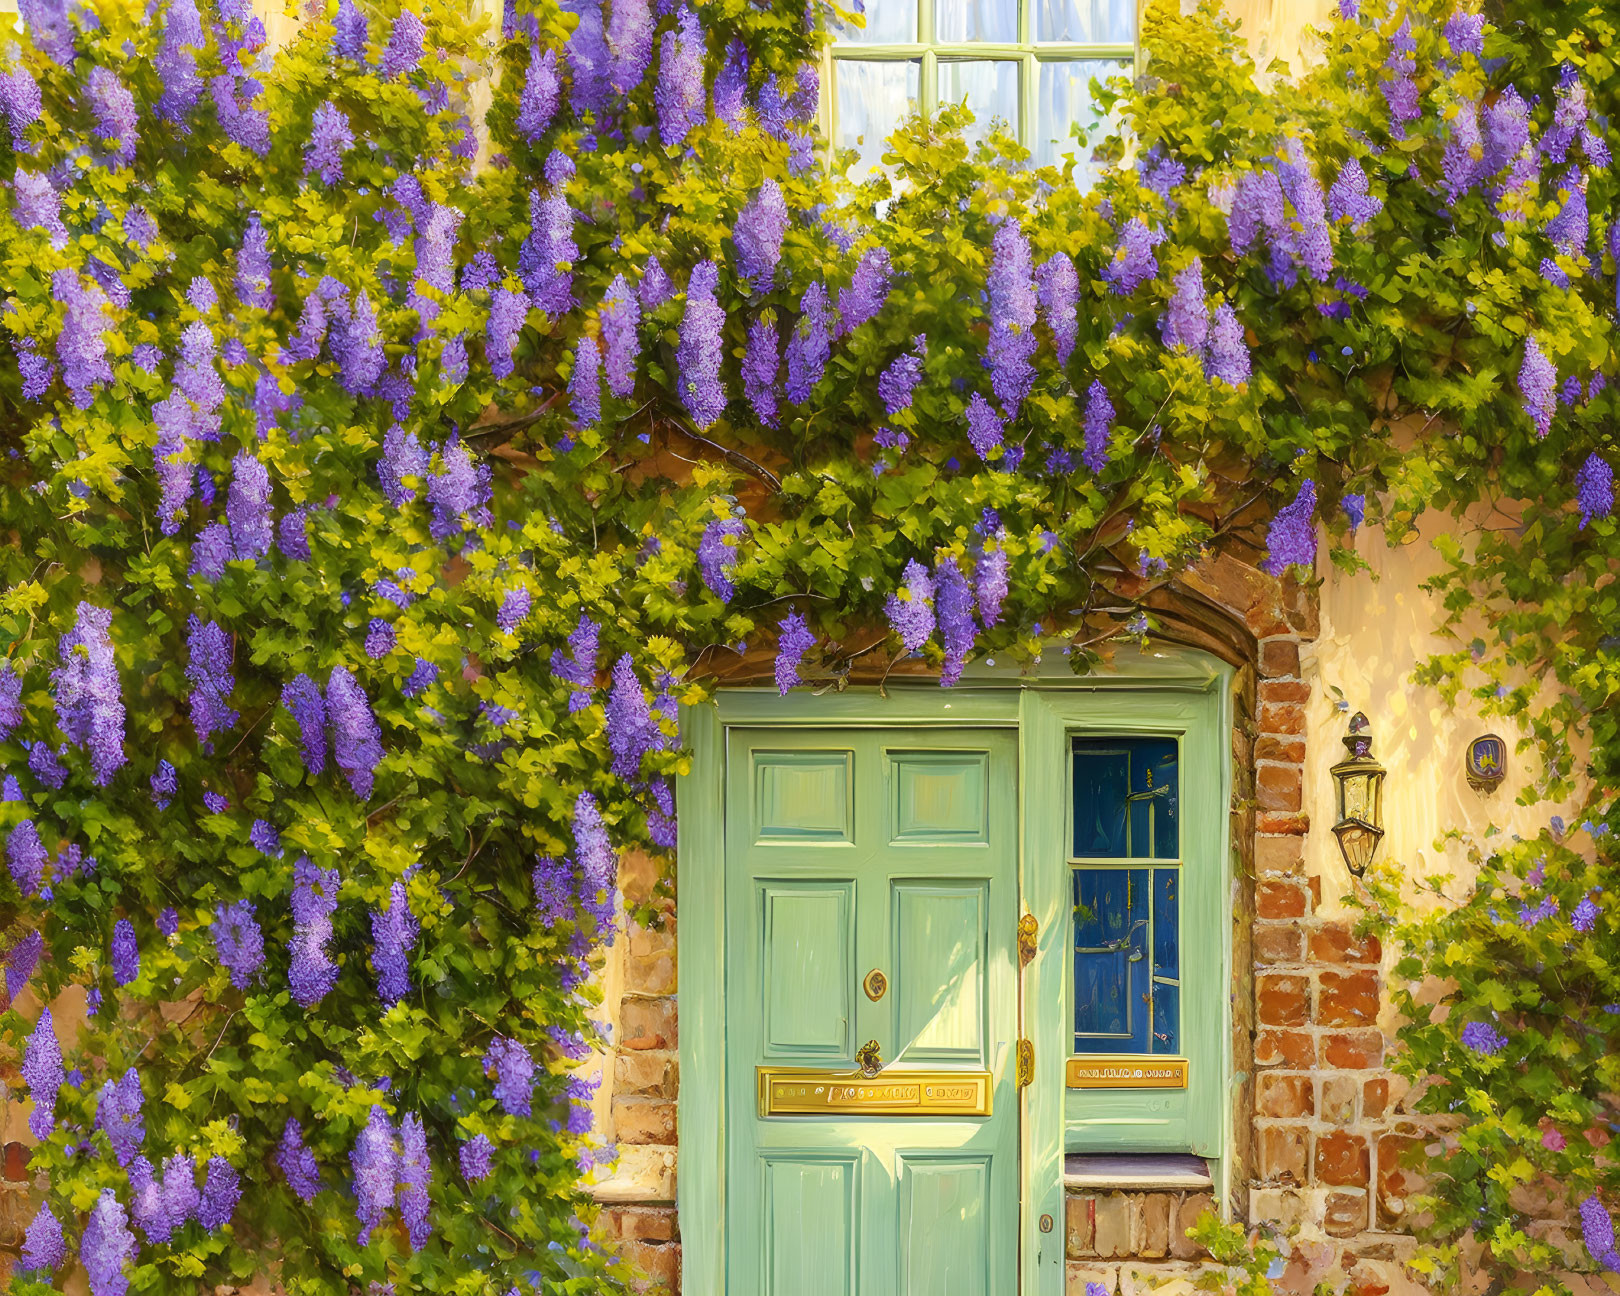 Brick wall with light blue door and purple wisteria blooms